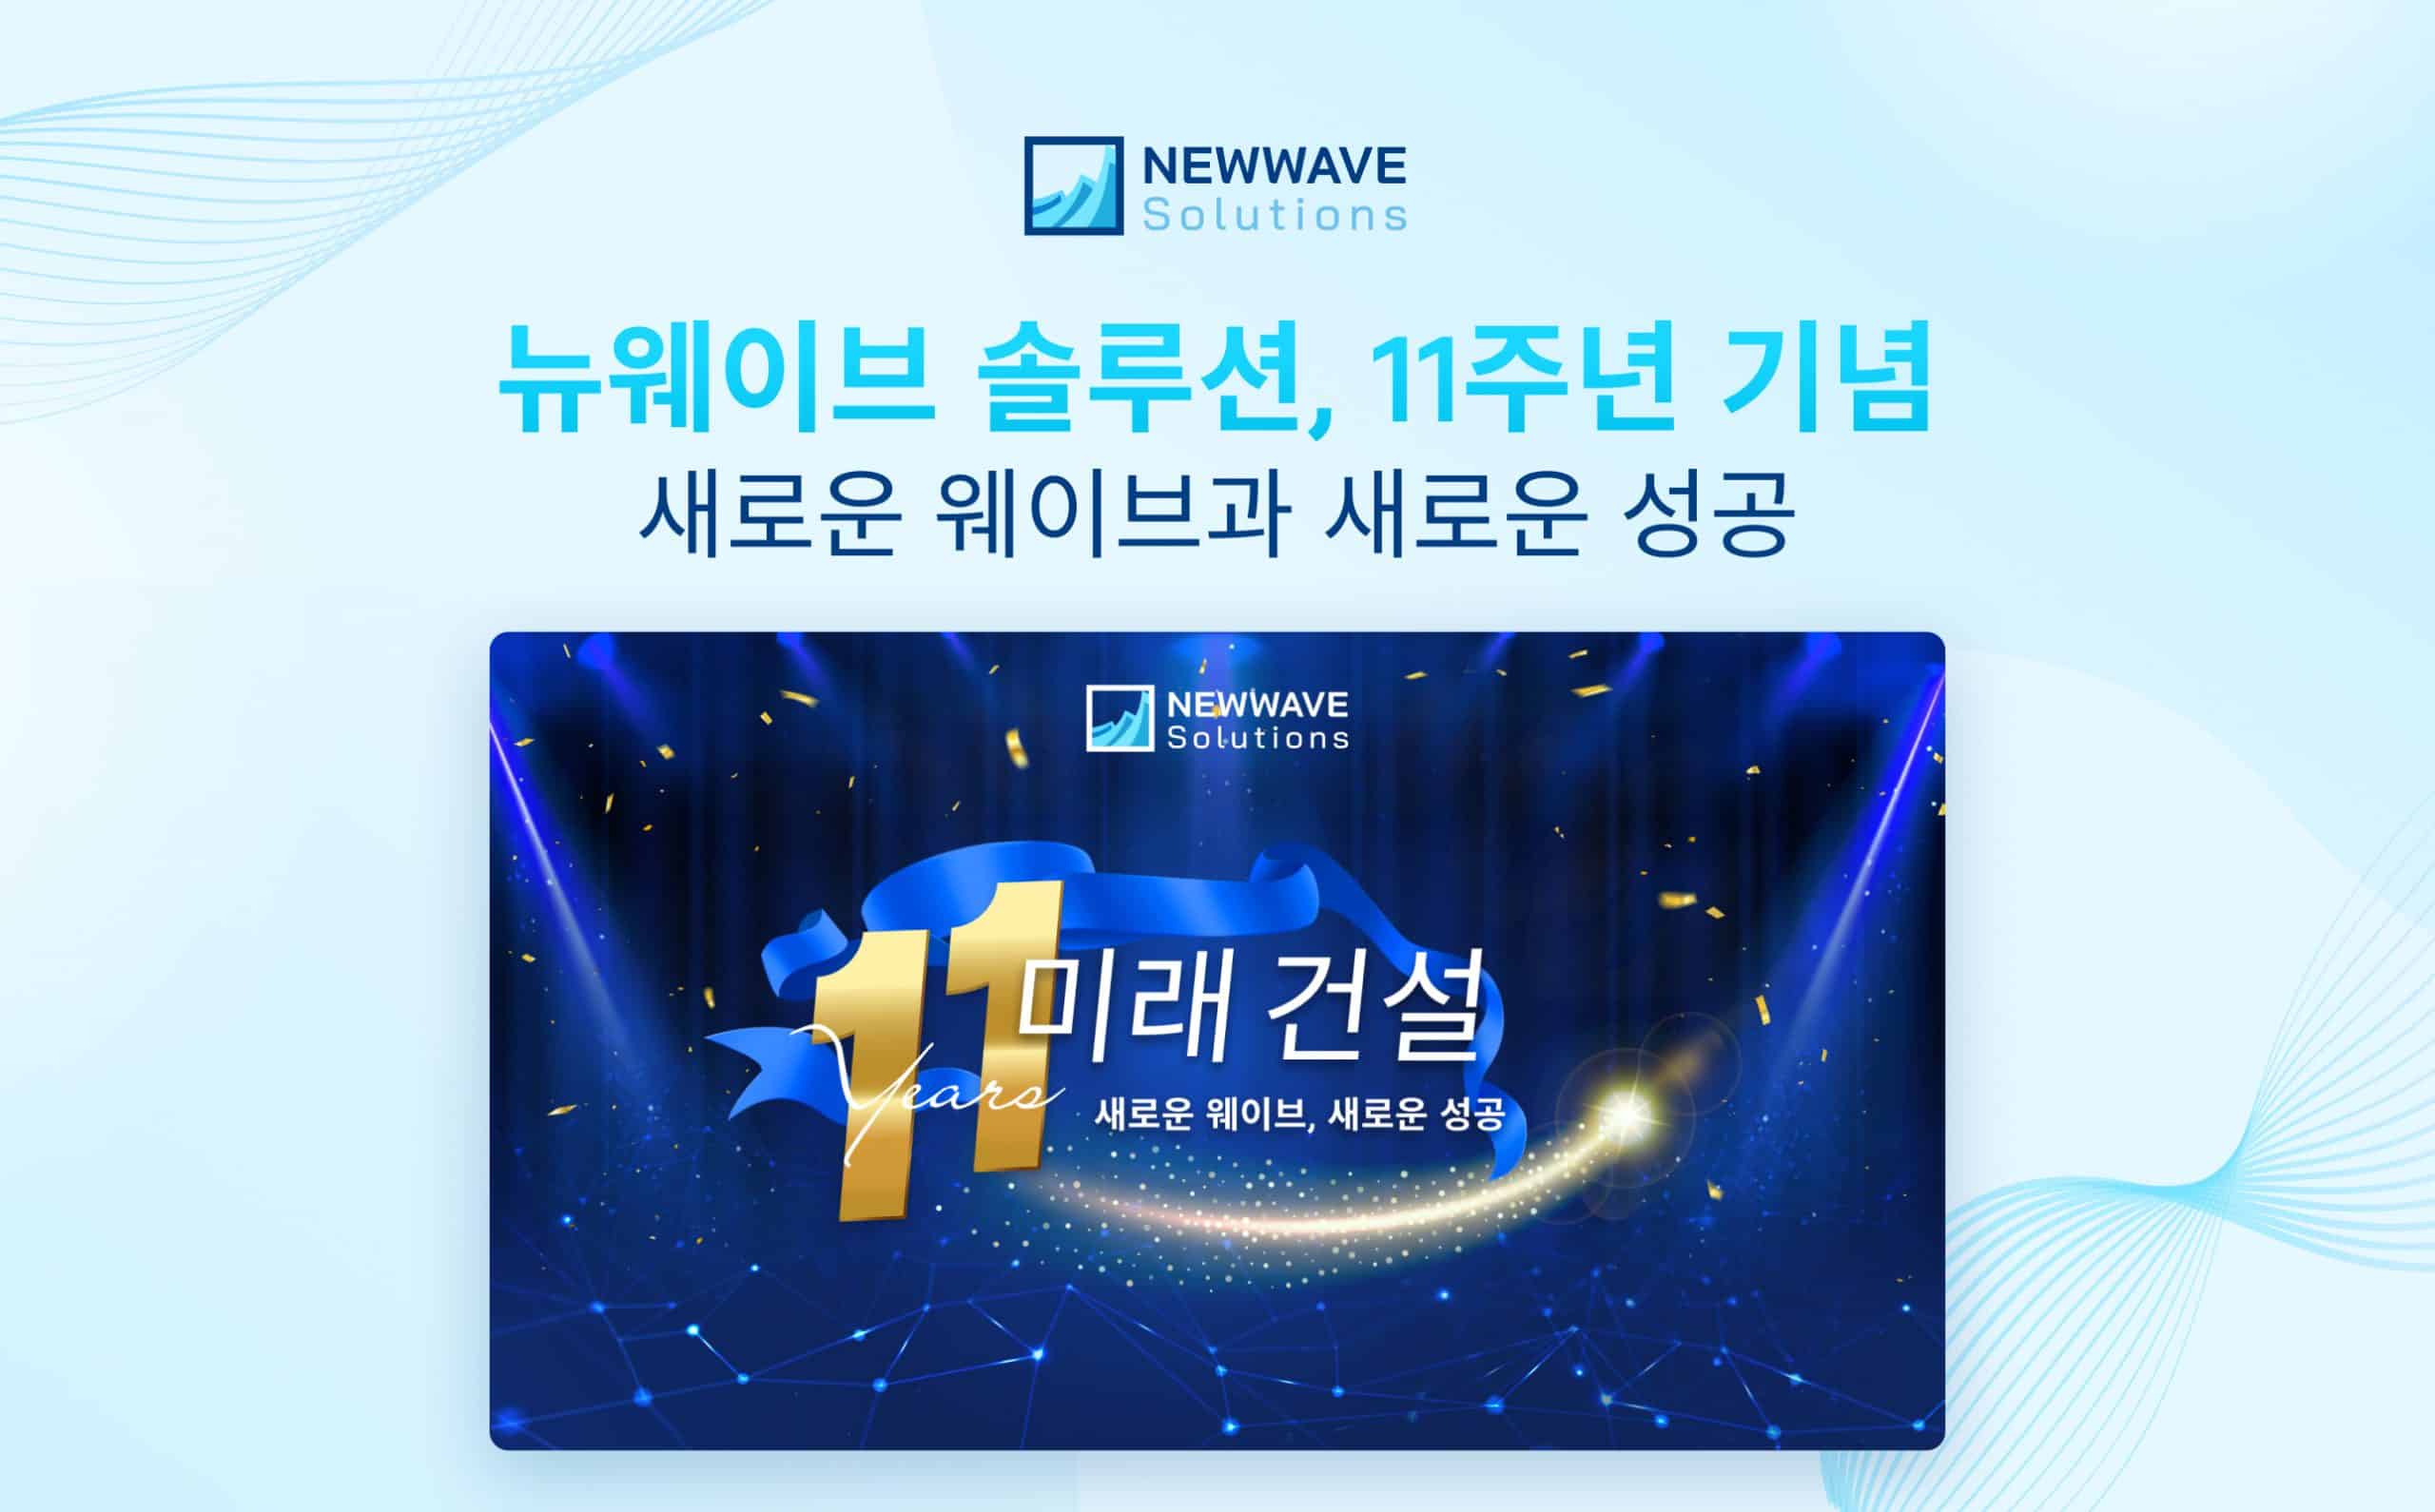 newwave solutions 11 years